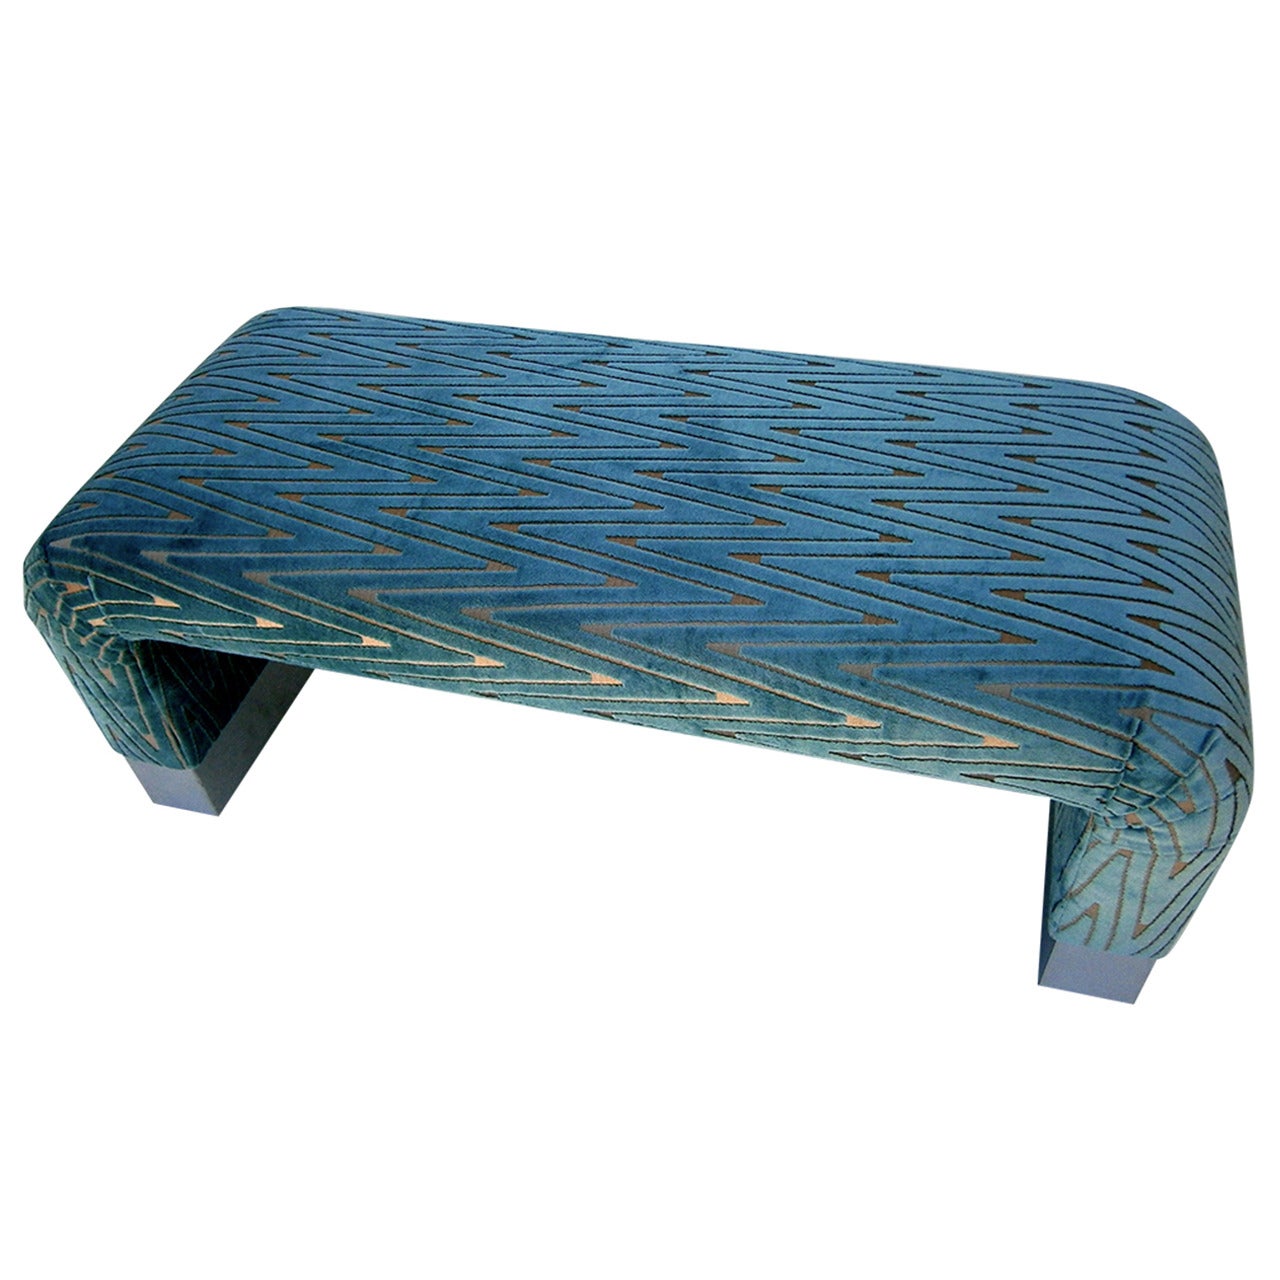 Luxurious Upholstered Waterfall Bench in the Style of Steve Chase.  C. 1992